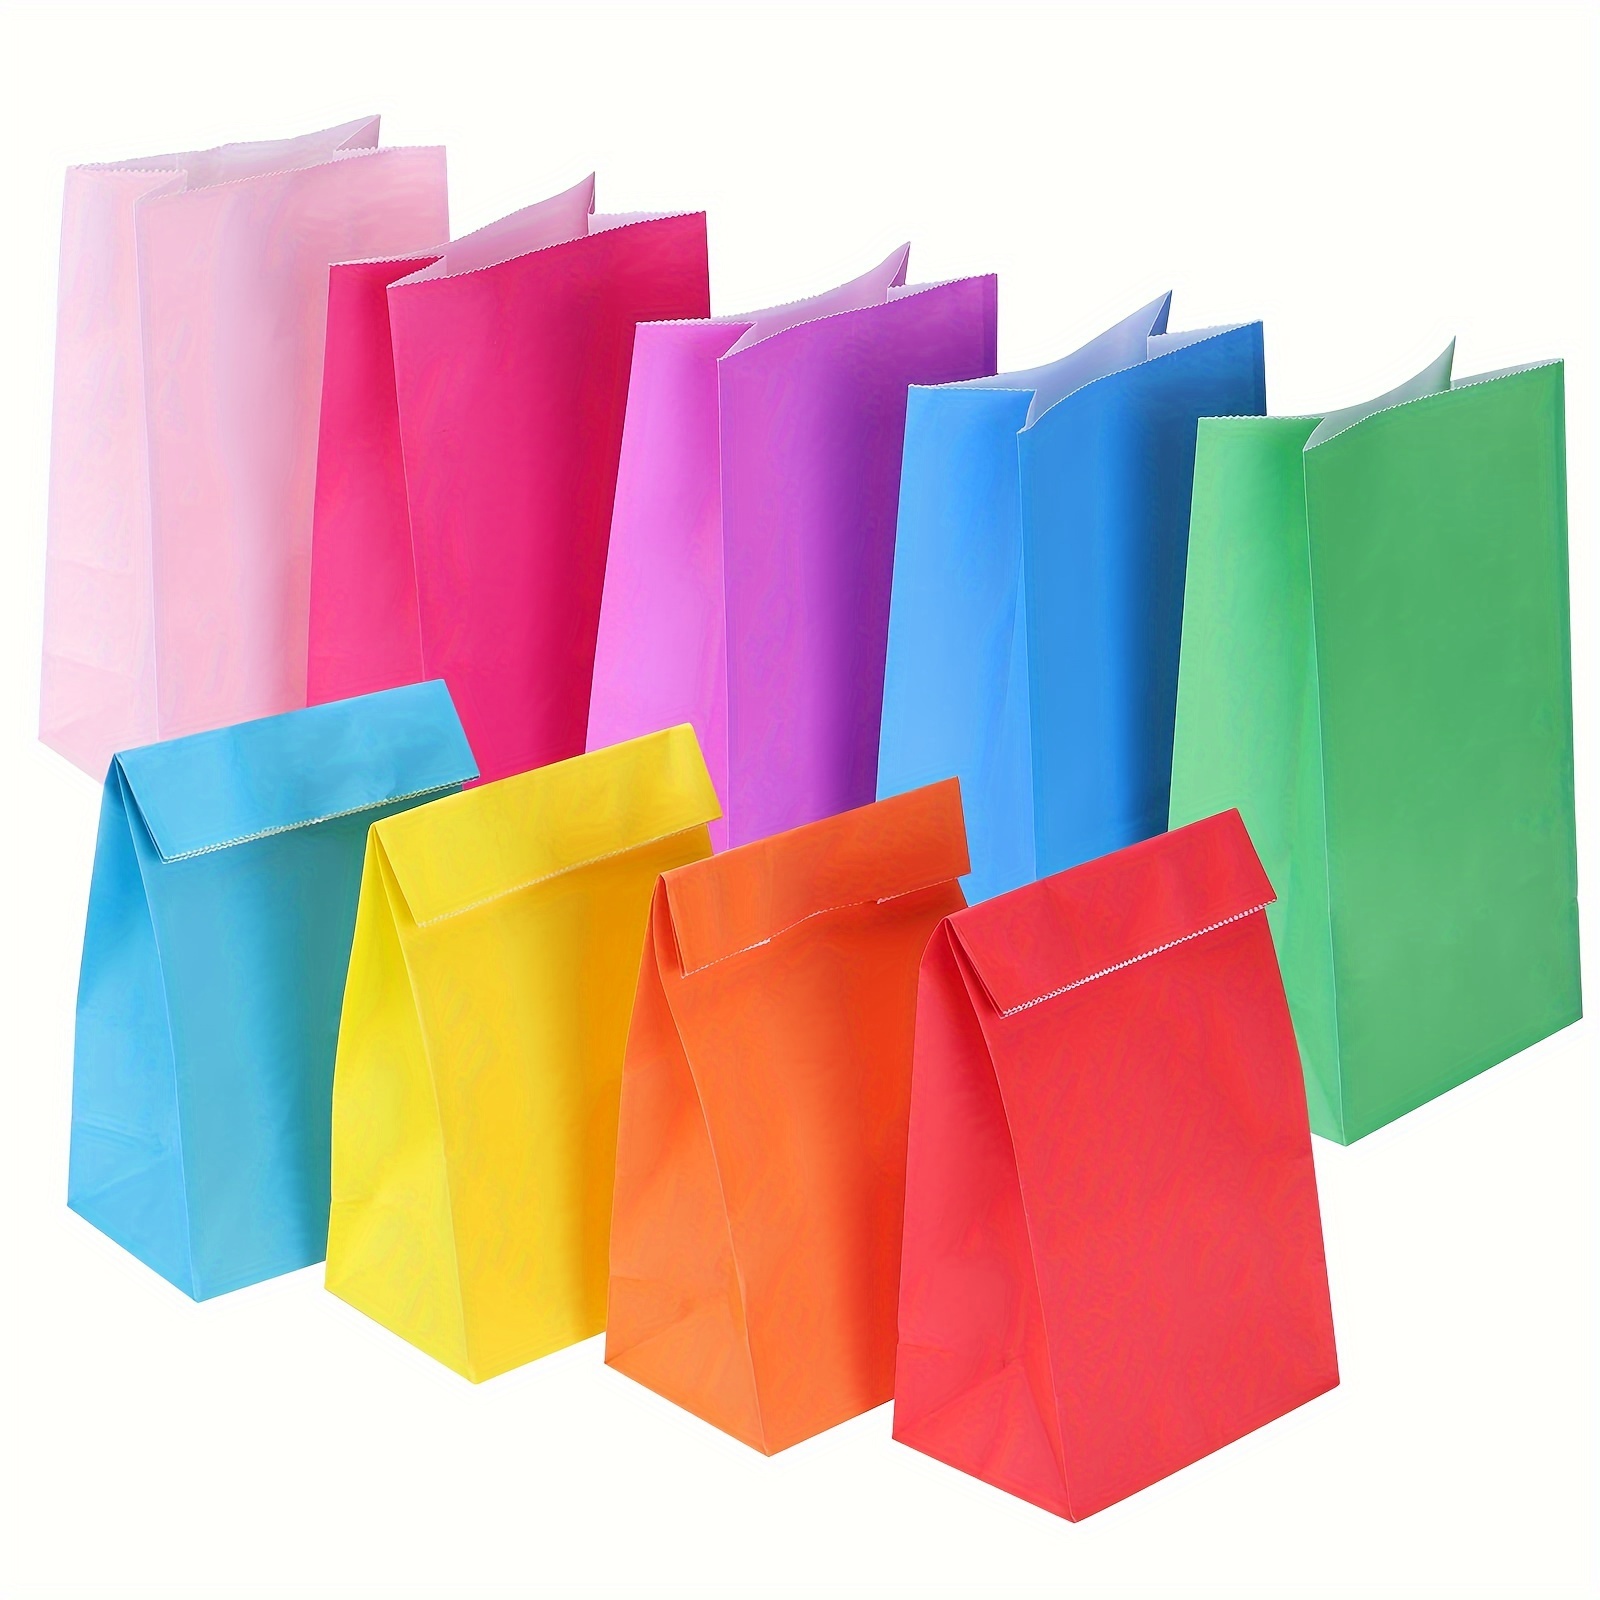  24 Pcs Rainbow Gift Bags with 24 Pcs White Tissues Paper  Rainbow Party Favor Bags with Handles Small Rainbow Bags for Kids Birthday  Baby Shower Weddings graduation 8.27 x 5.91 x